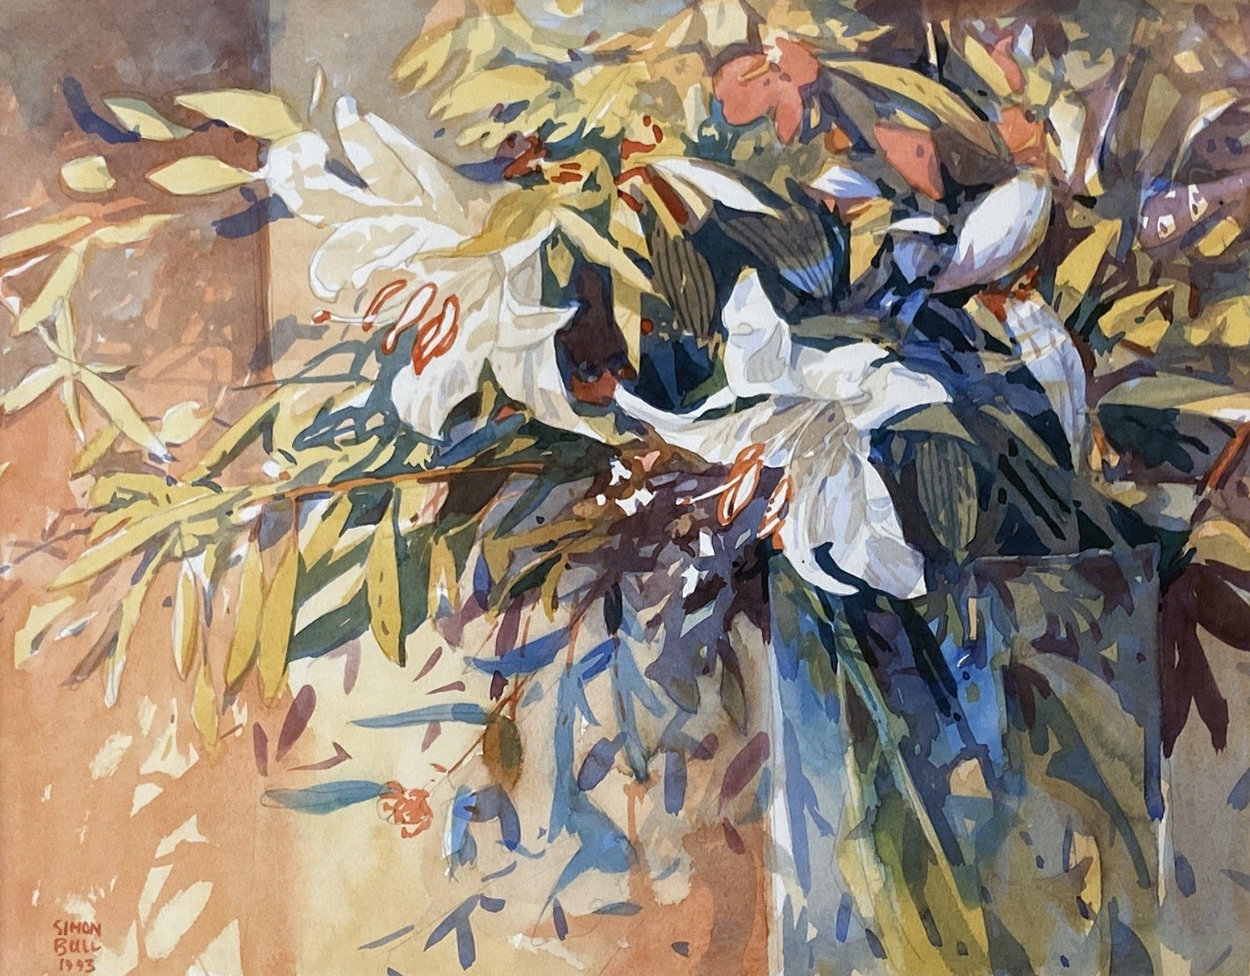 Lilies in a Vase Watercolor 1993 27x27 Watercolor by Simon Bull